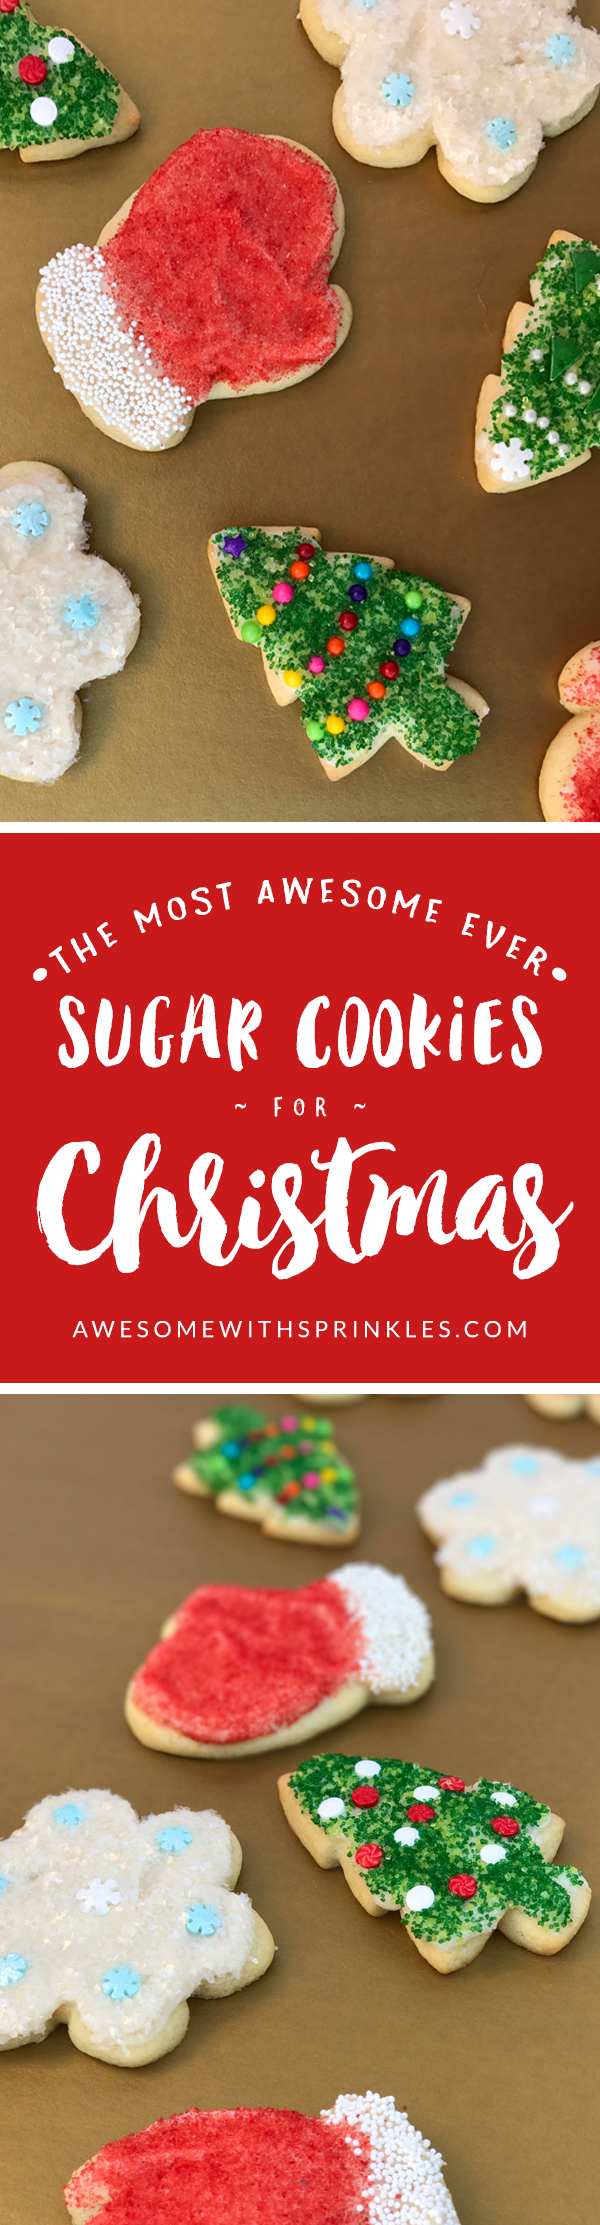 The Most Awesome Ever Sugar Cookies for Chirstmas | Awesome with Sprinkles